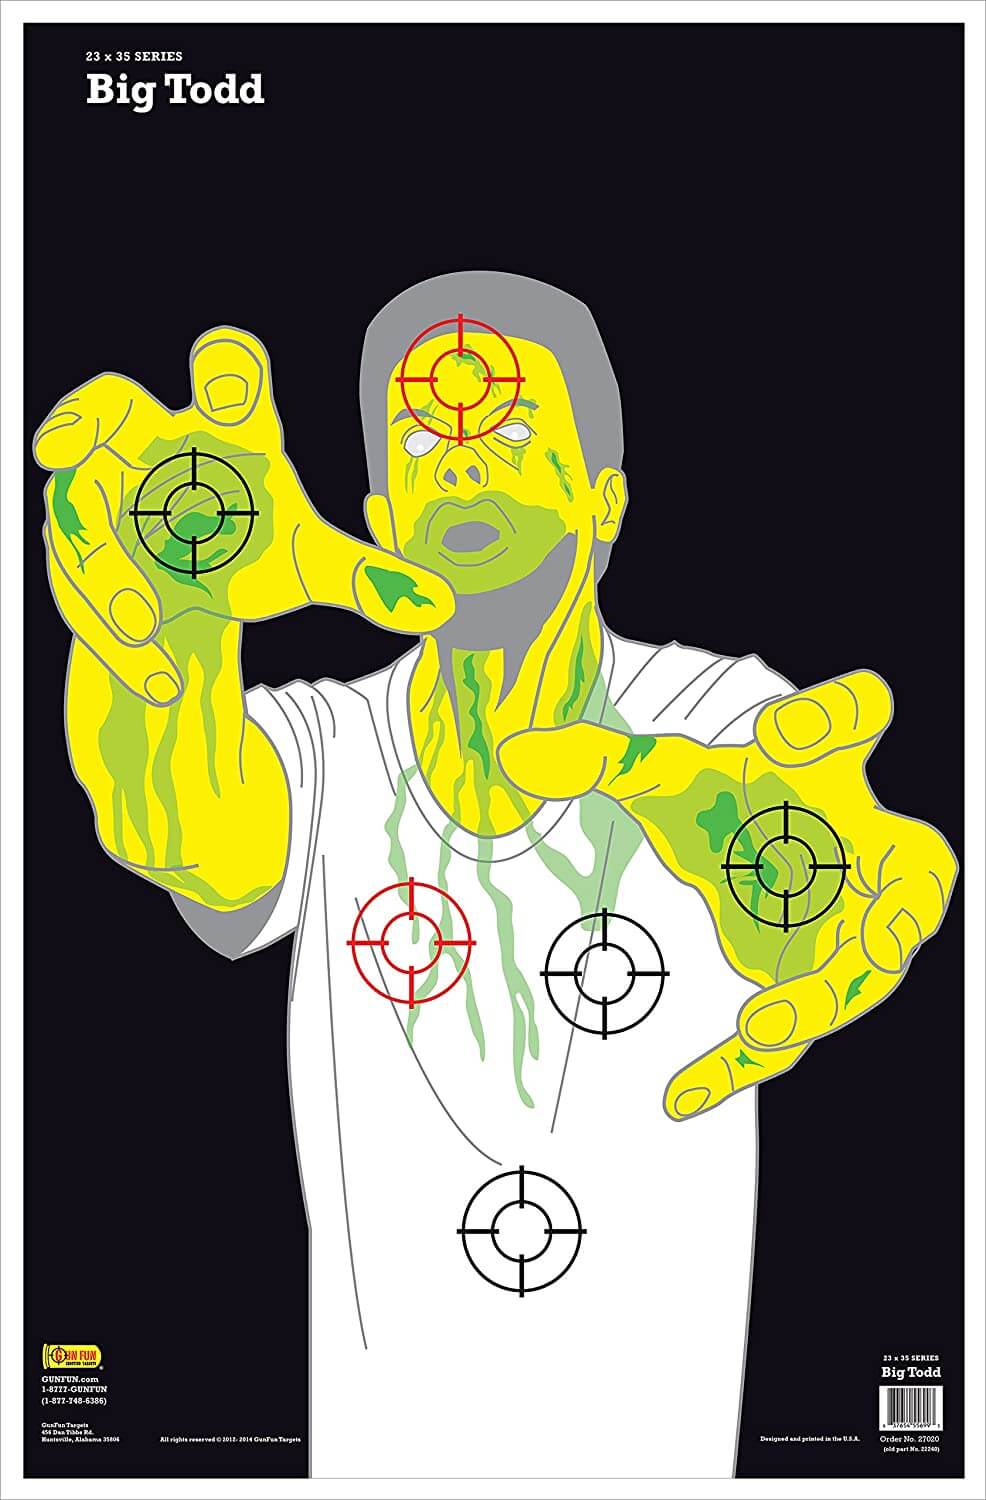 Zombie Target 6 Pack 23x35